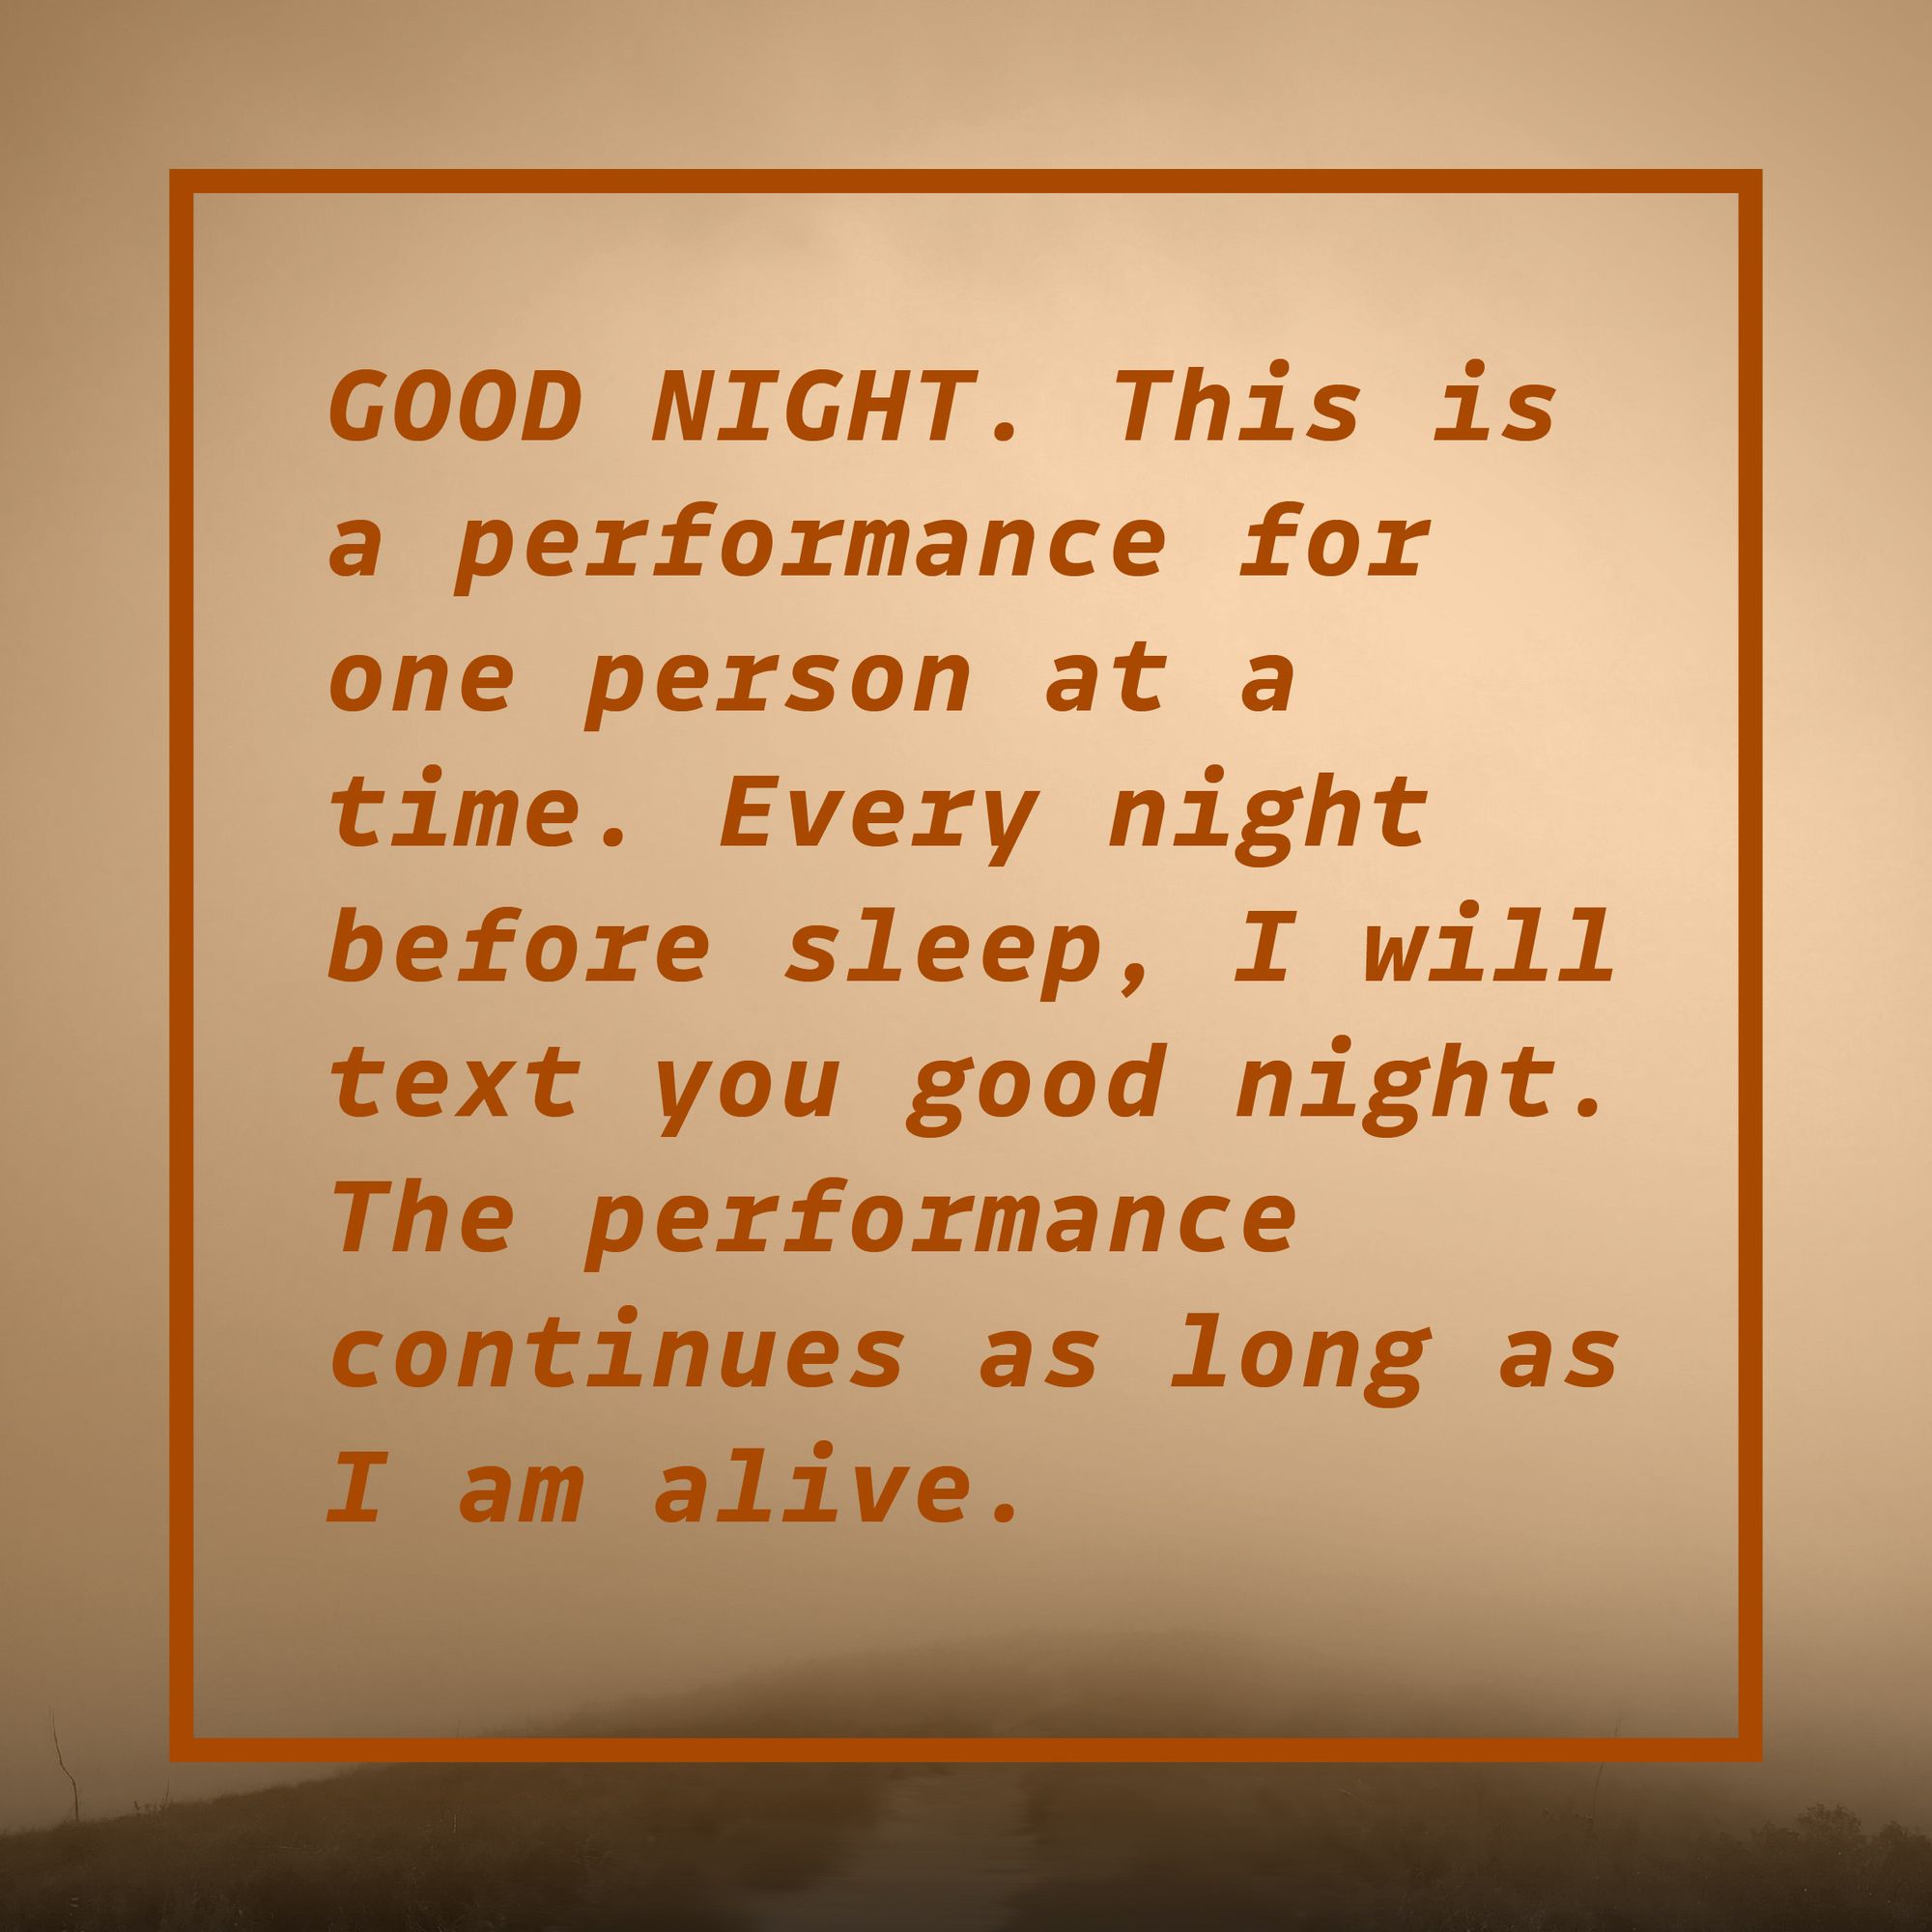 In a photograph of orange wall text, the piece "GOOD NIGHT" is described as a performance for one person at a time, where every night before sleep, the artist will text you goodnight, and the performance will continue for as long as she is alive.